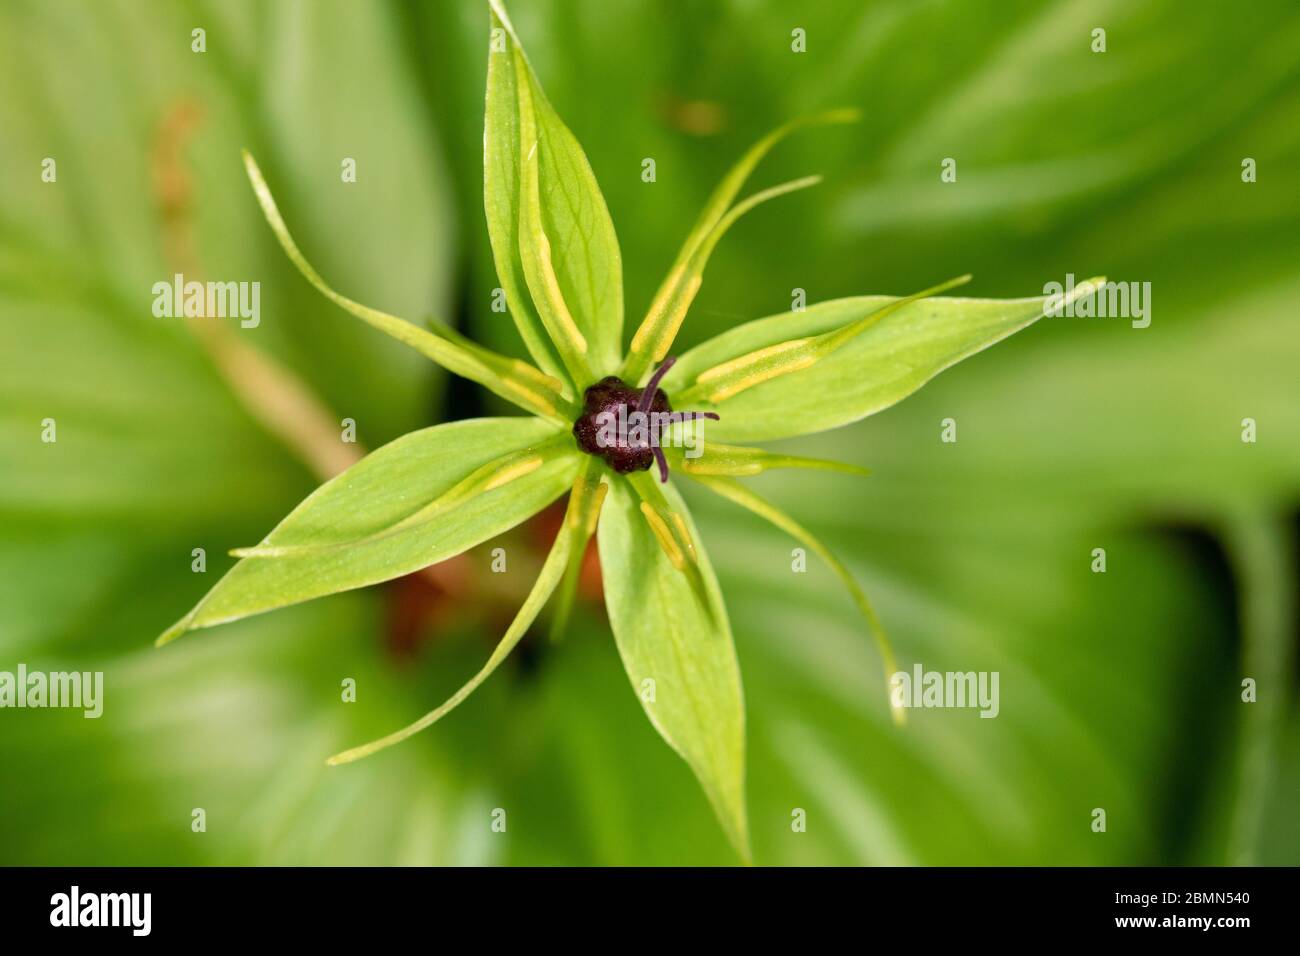 The close-up of the flower of Paris quadrifolia, the herb-paris or true lover's knot Stock Photo